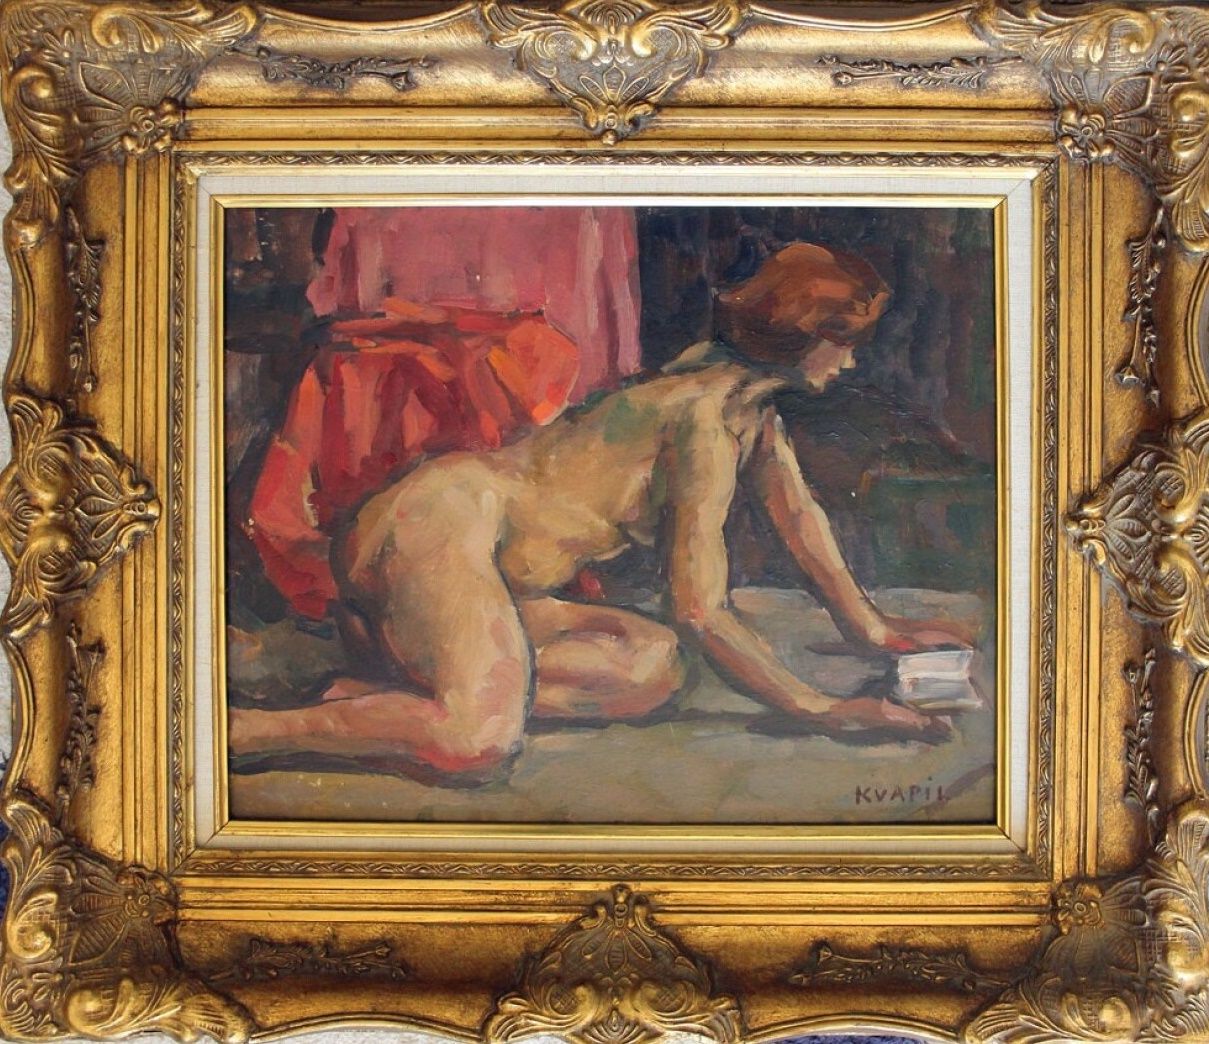 Null Charles KVAPIL (1884-1958)

The Reading 

Oil on wood panel

Signed lower r&hellip;